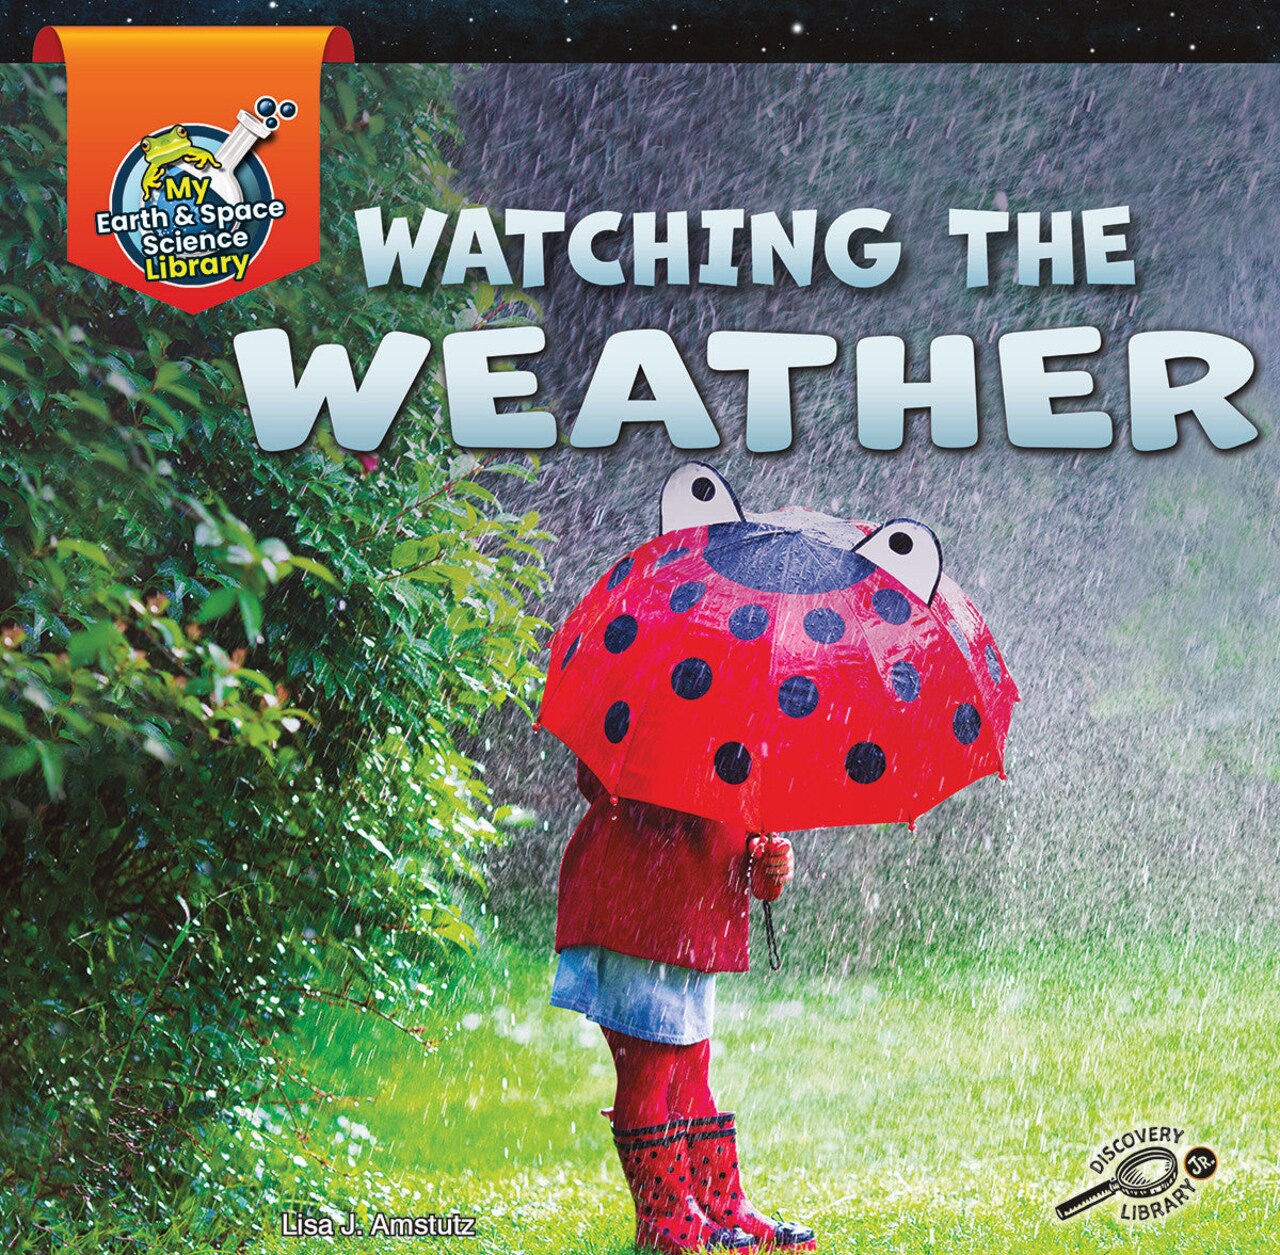 Rourke Educational Media | My Earth and Space Science Library: Watching the Weather | 24pgs